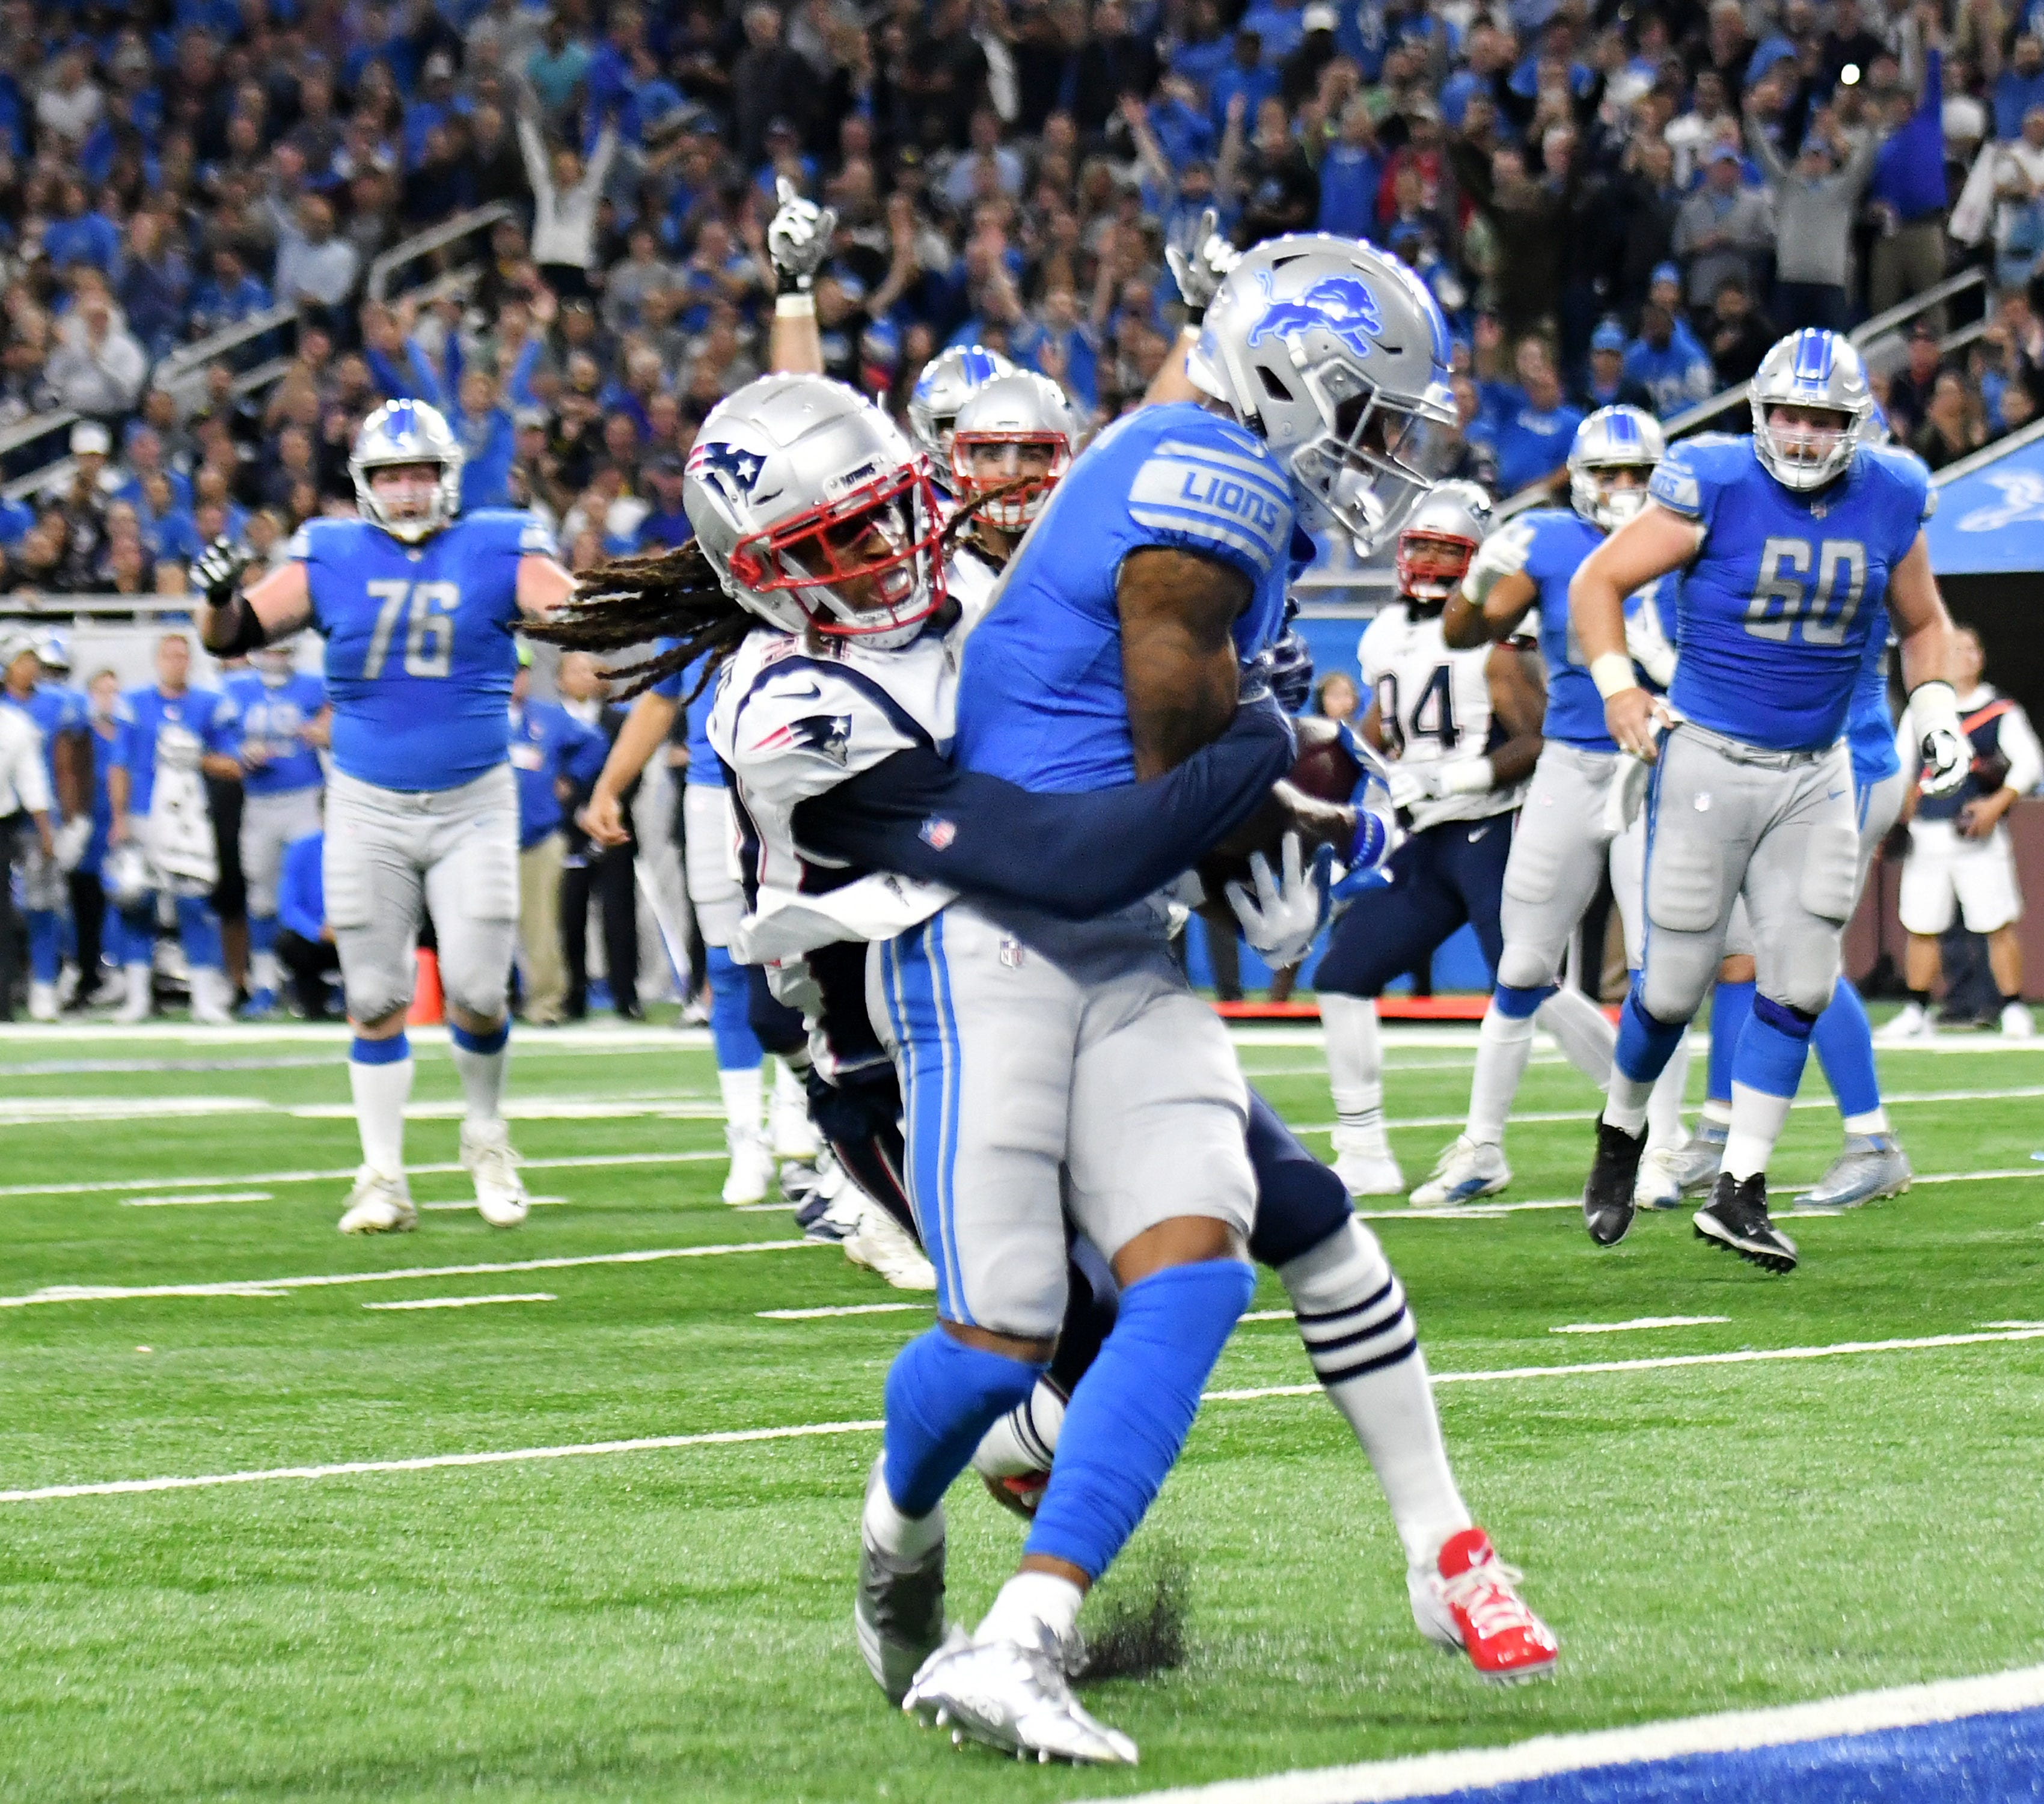 The Patriots' Stephon Gilmore, left, tries to tackle the Lions' Kenny Golladay at the goal line in the second quarter. The play was ruled short initially but after a challenge and review it was ruled a touchdown.